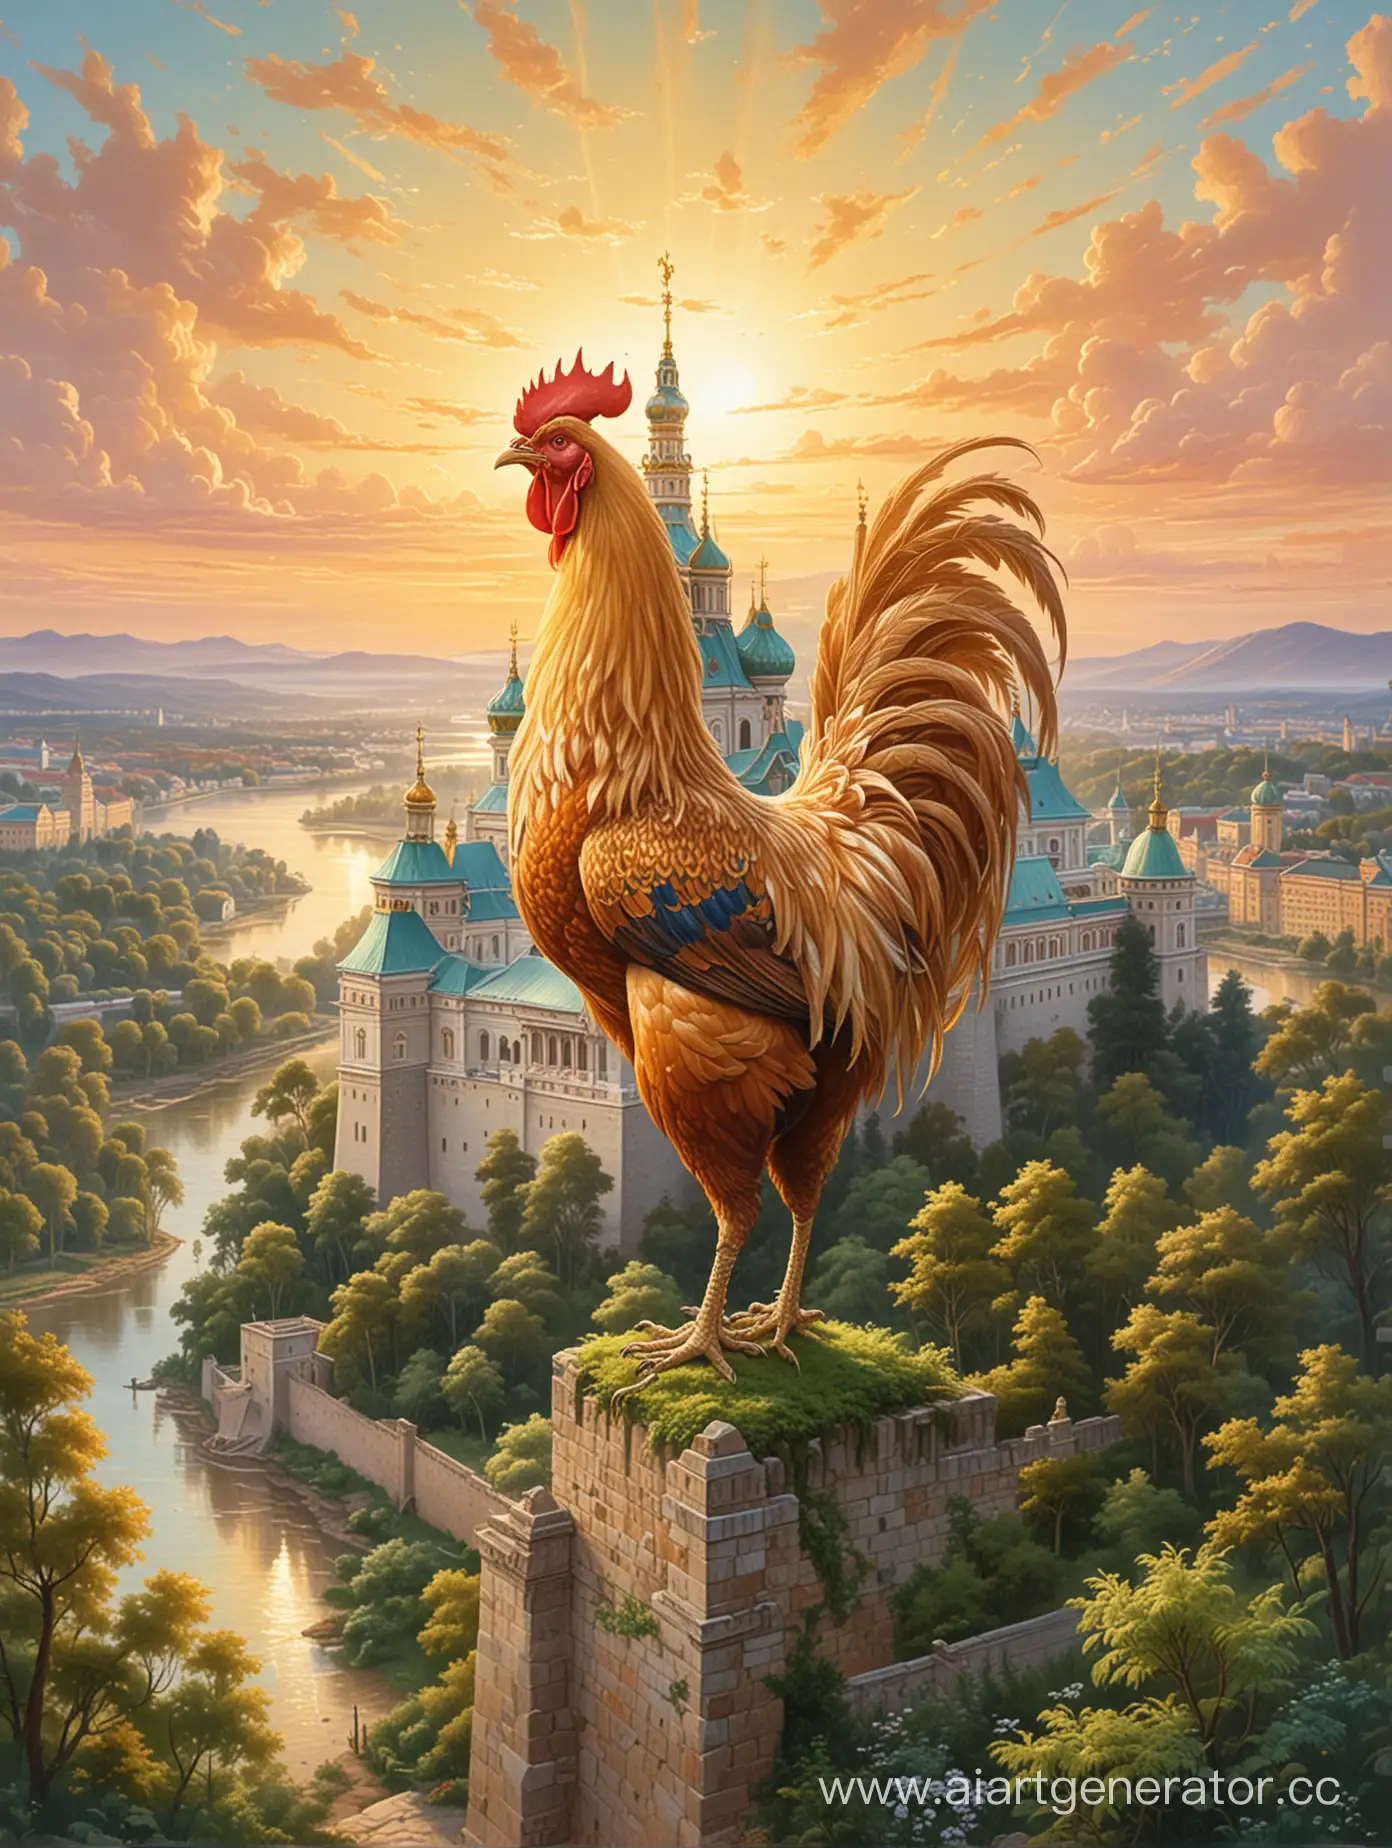 Majestic-Royal-Palace-with-Golden-Rooster-Tower-at-Sunrise